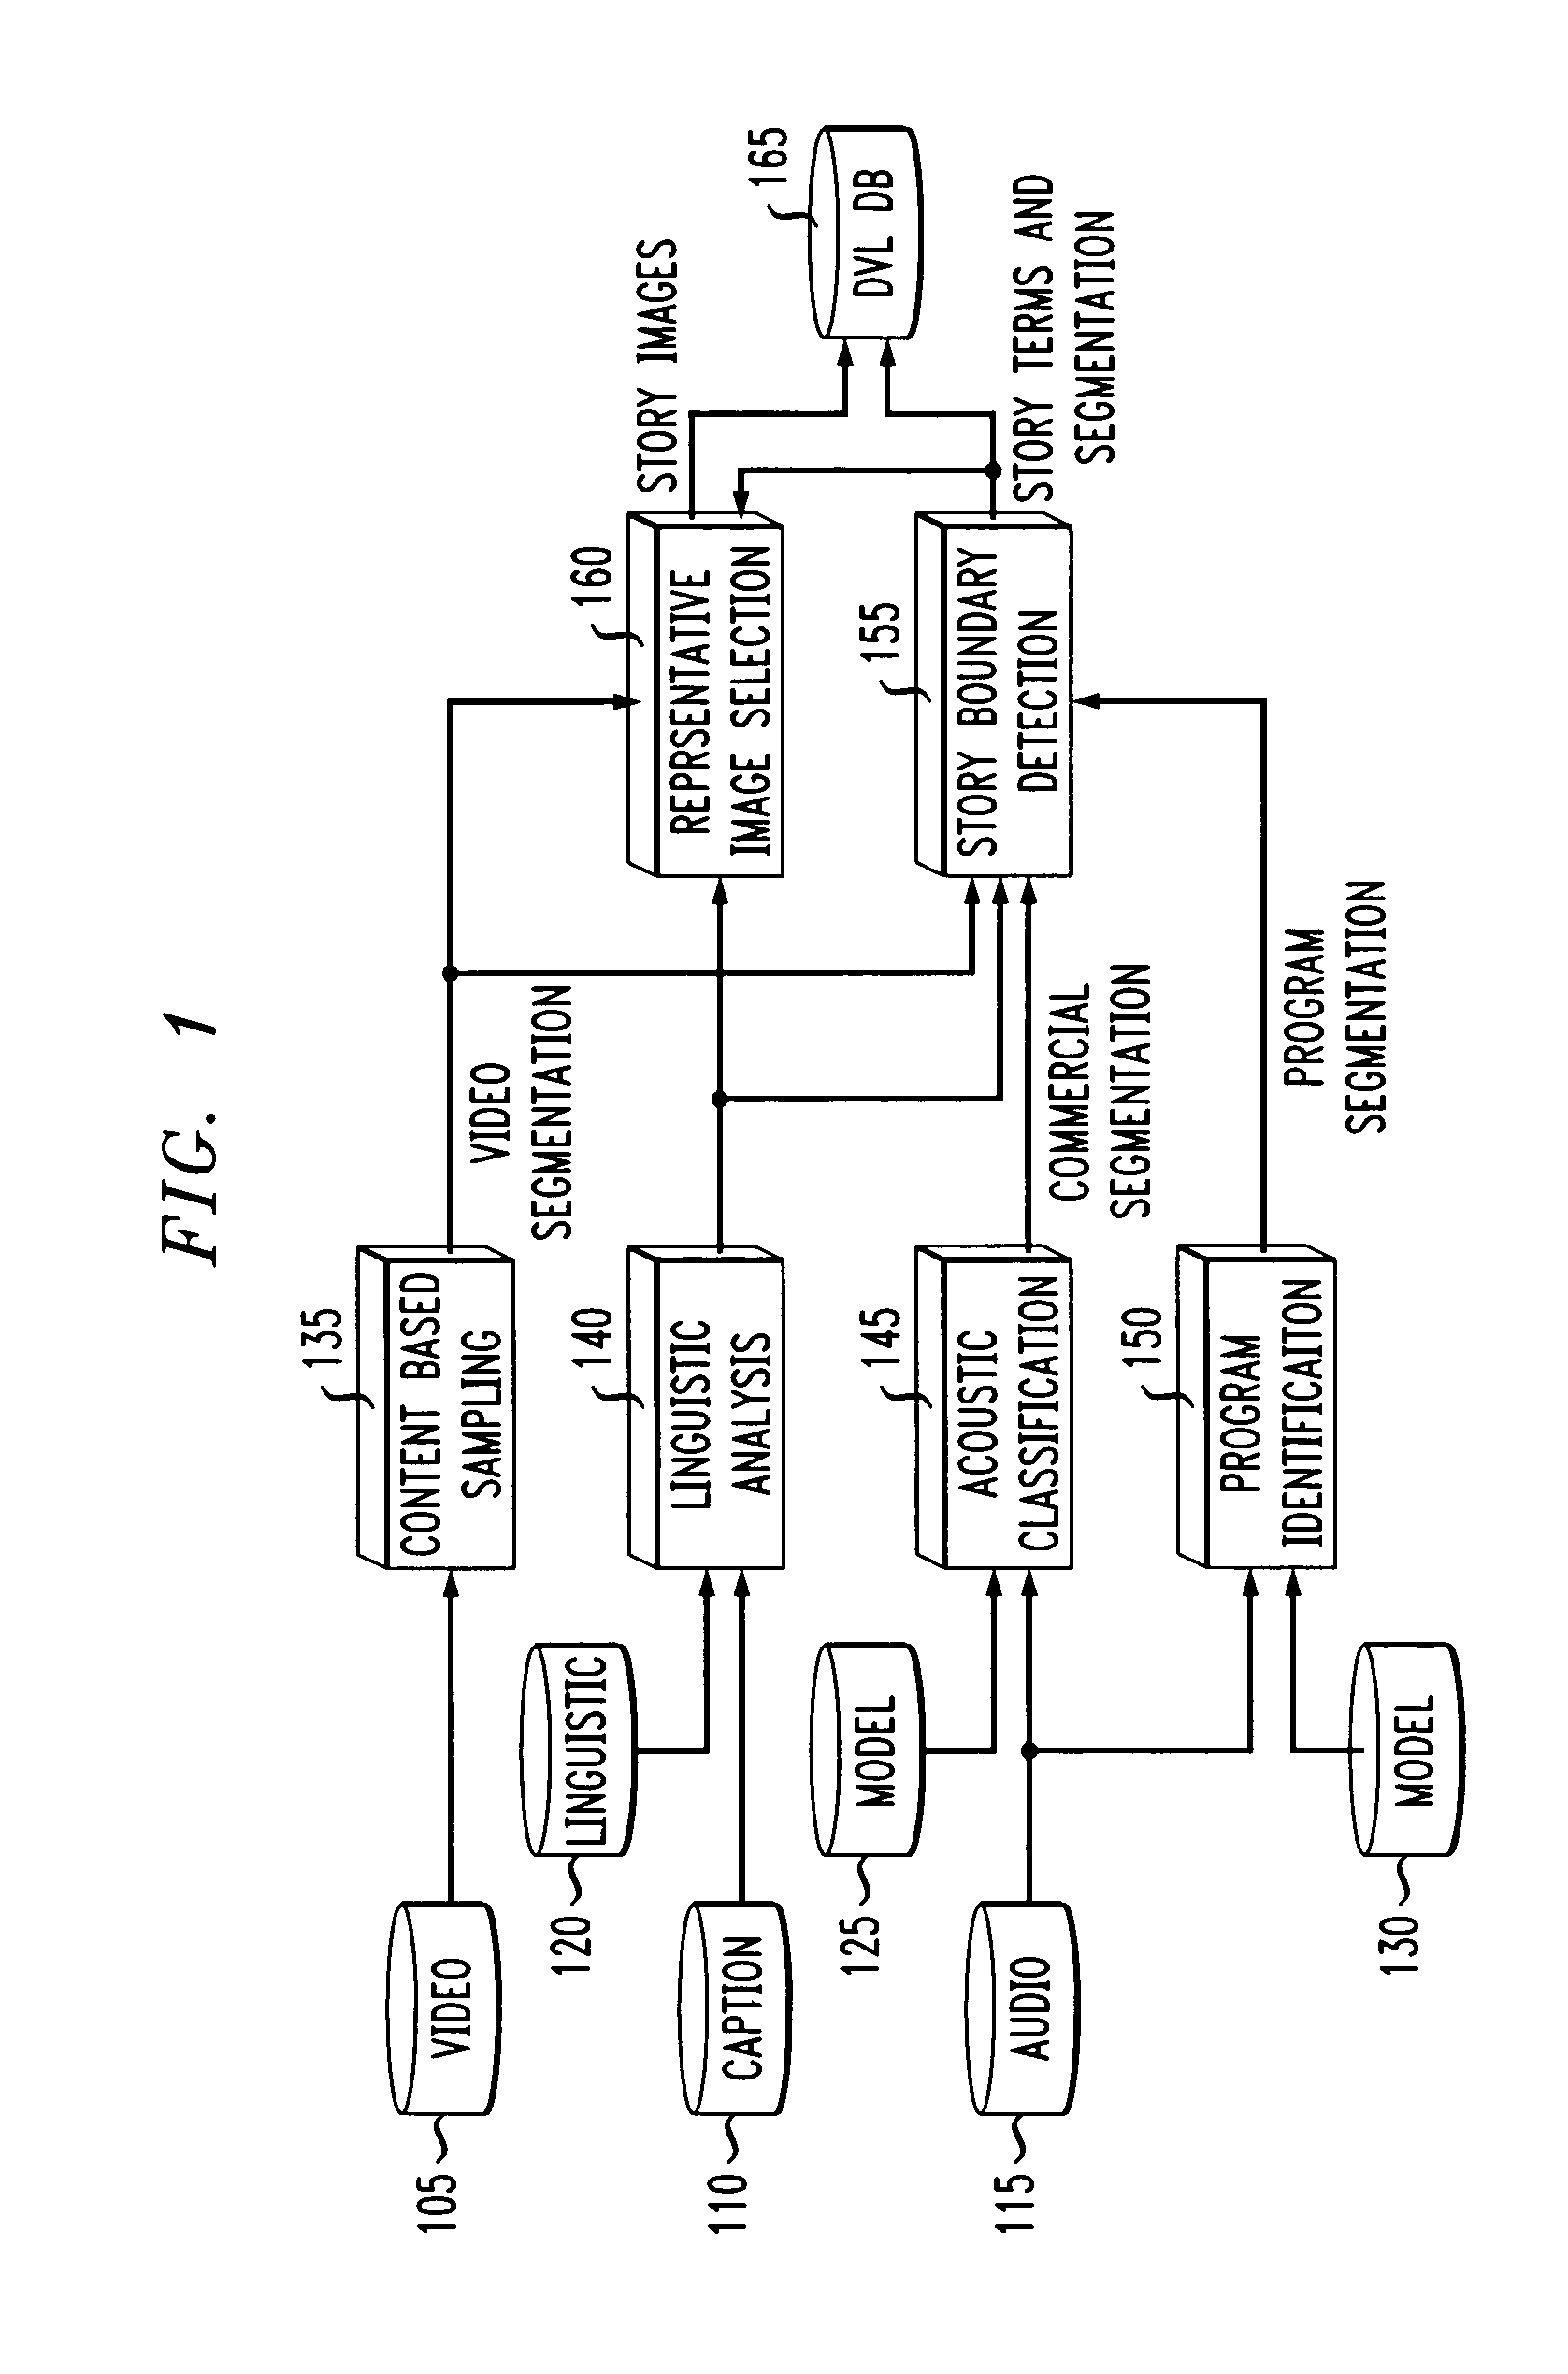 Method and system for embedding information into streaming media